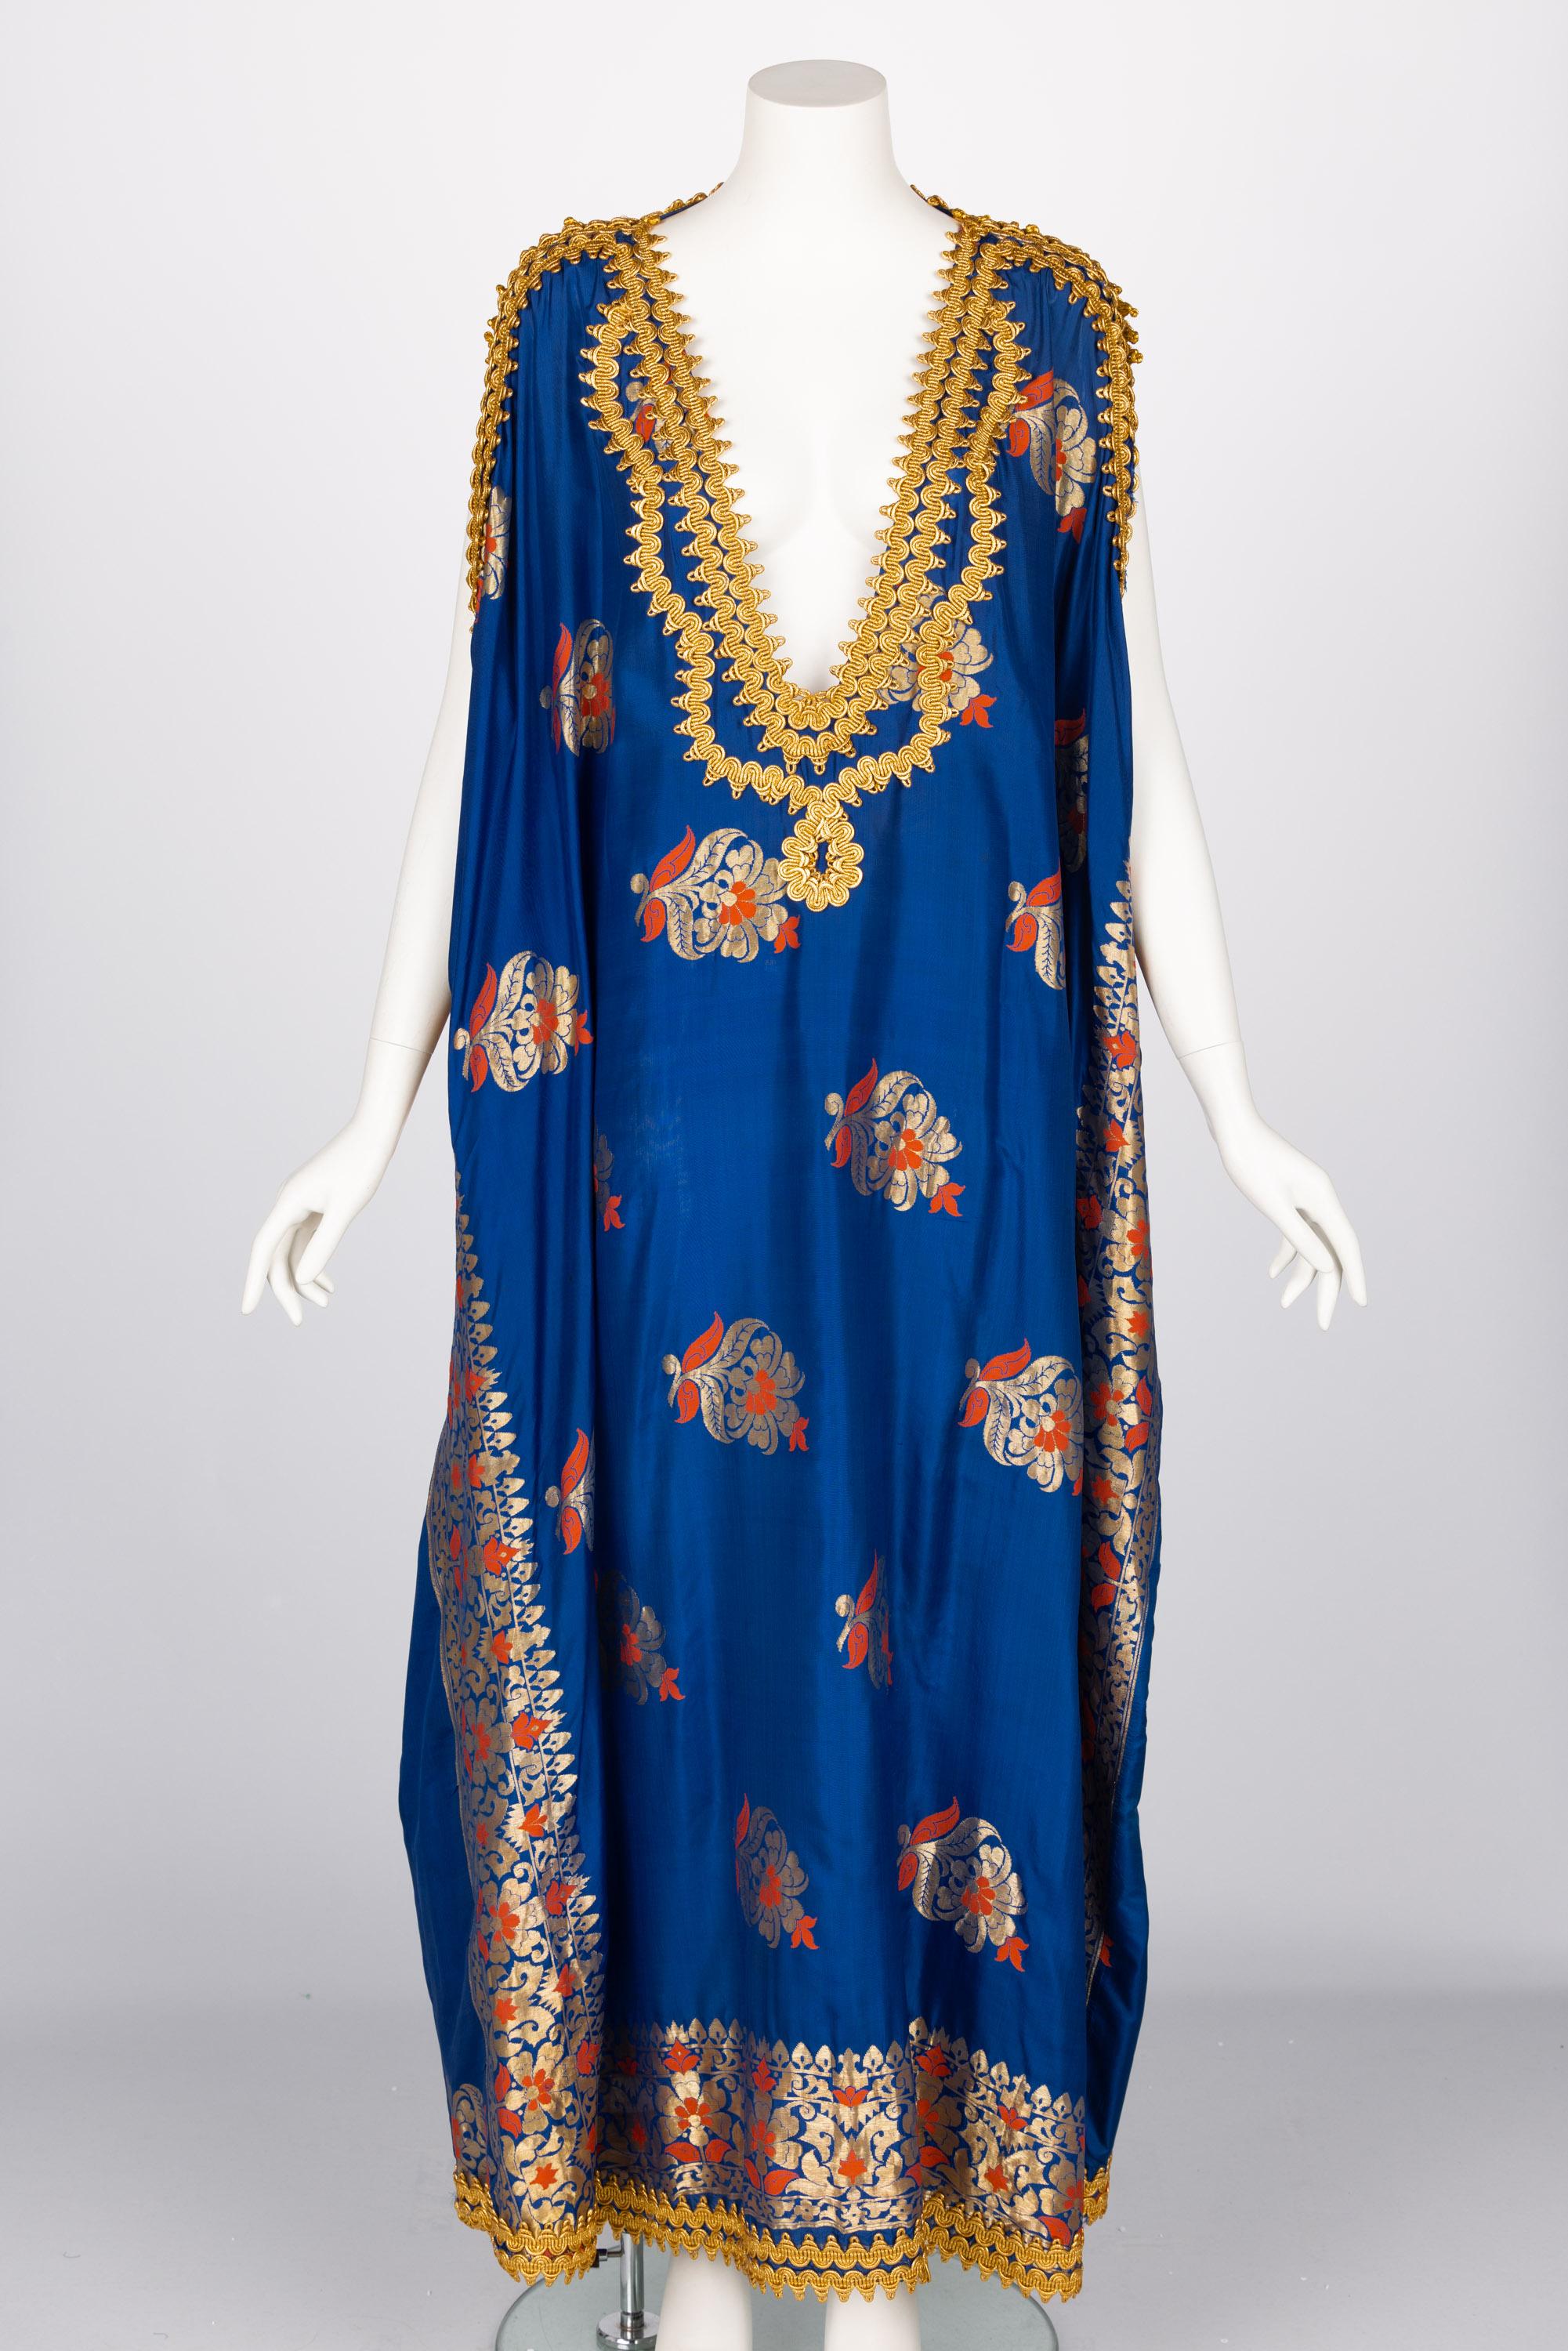 The history of the caftan is a bit uncertain. It is believed to have originated from Turkish culture but appears in many others. In Morocco, it was first worn by men but was eventually adopted by women, as well. These loose tunics are historically